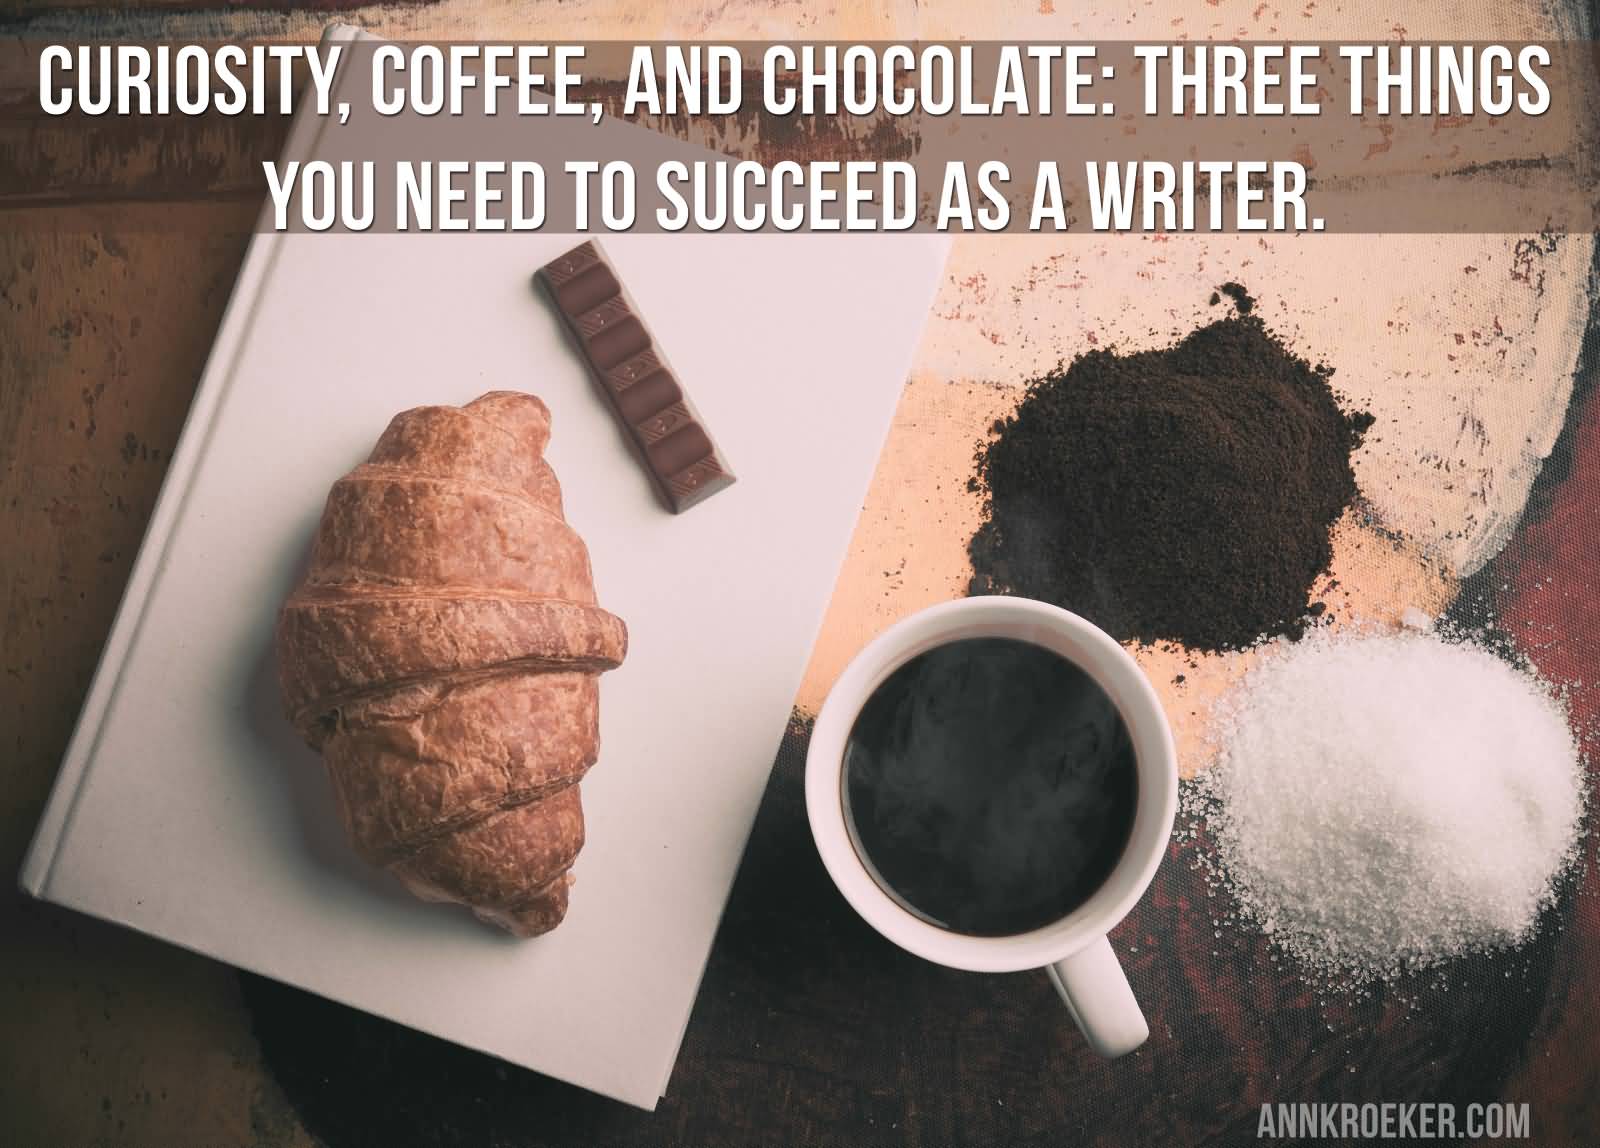 Curiosity, coffee, and chocolate three things you need to succeed as a writer